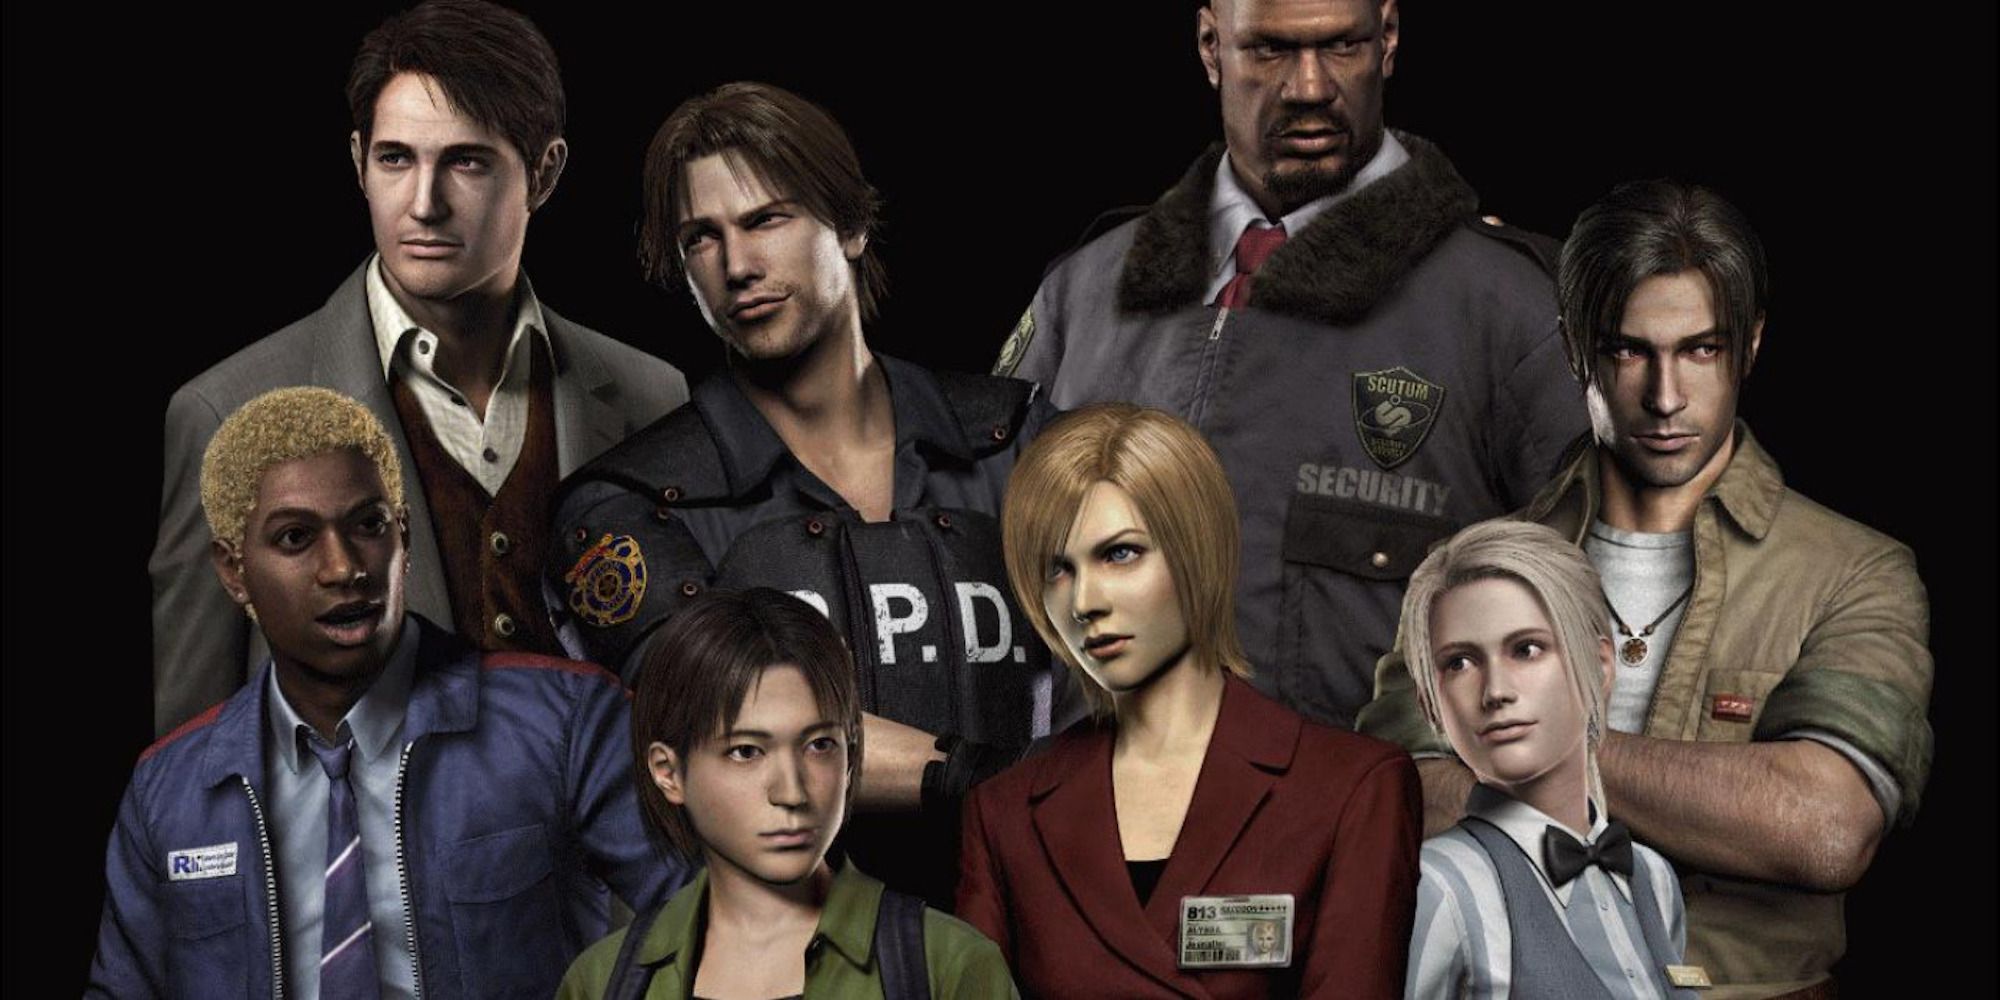 Promo art featuring the main characters from Resident Evil Outbreak